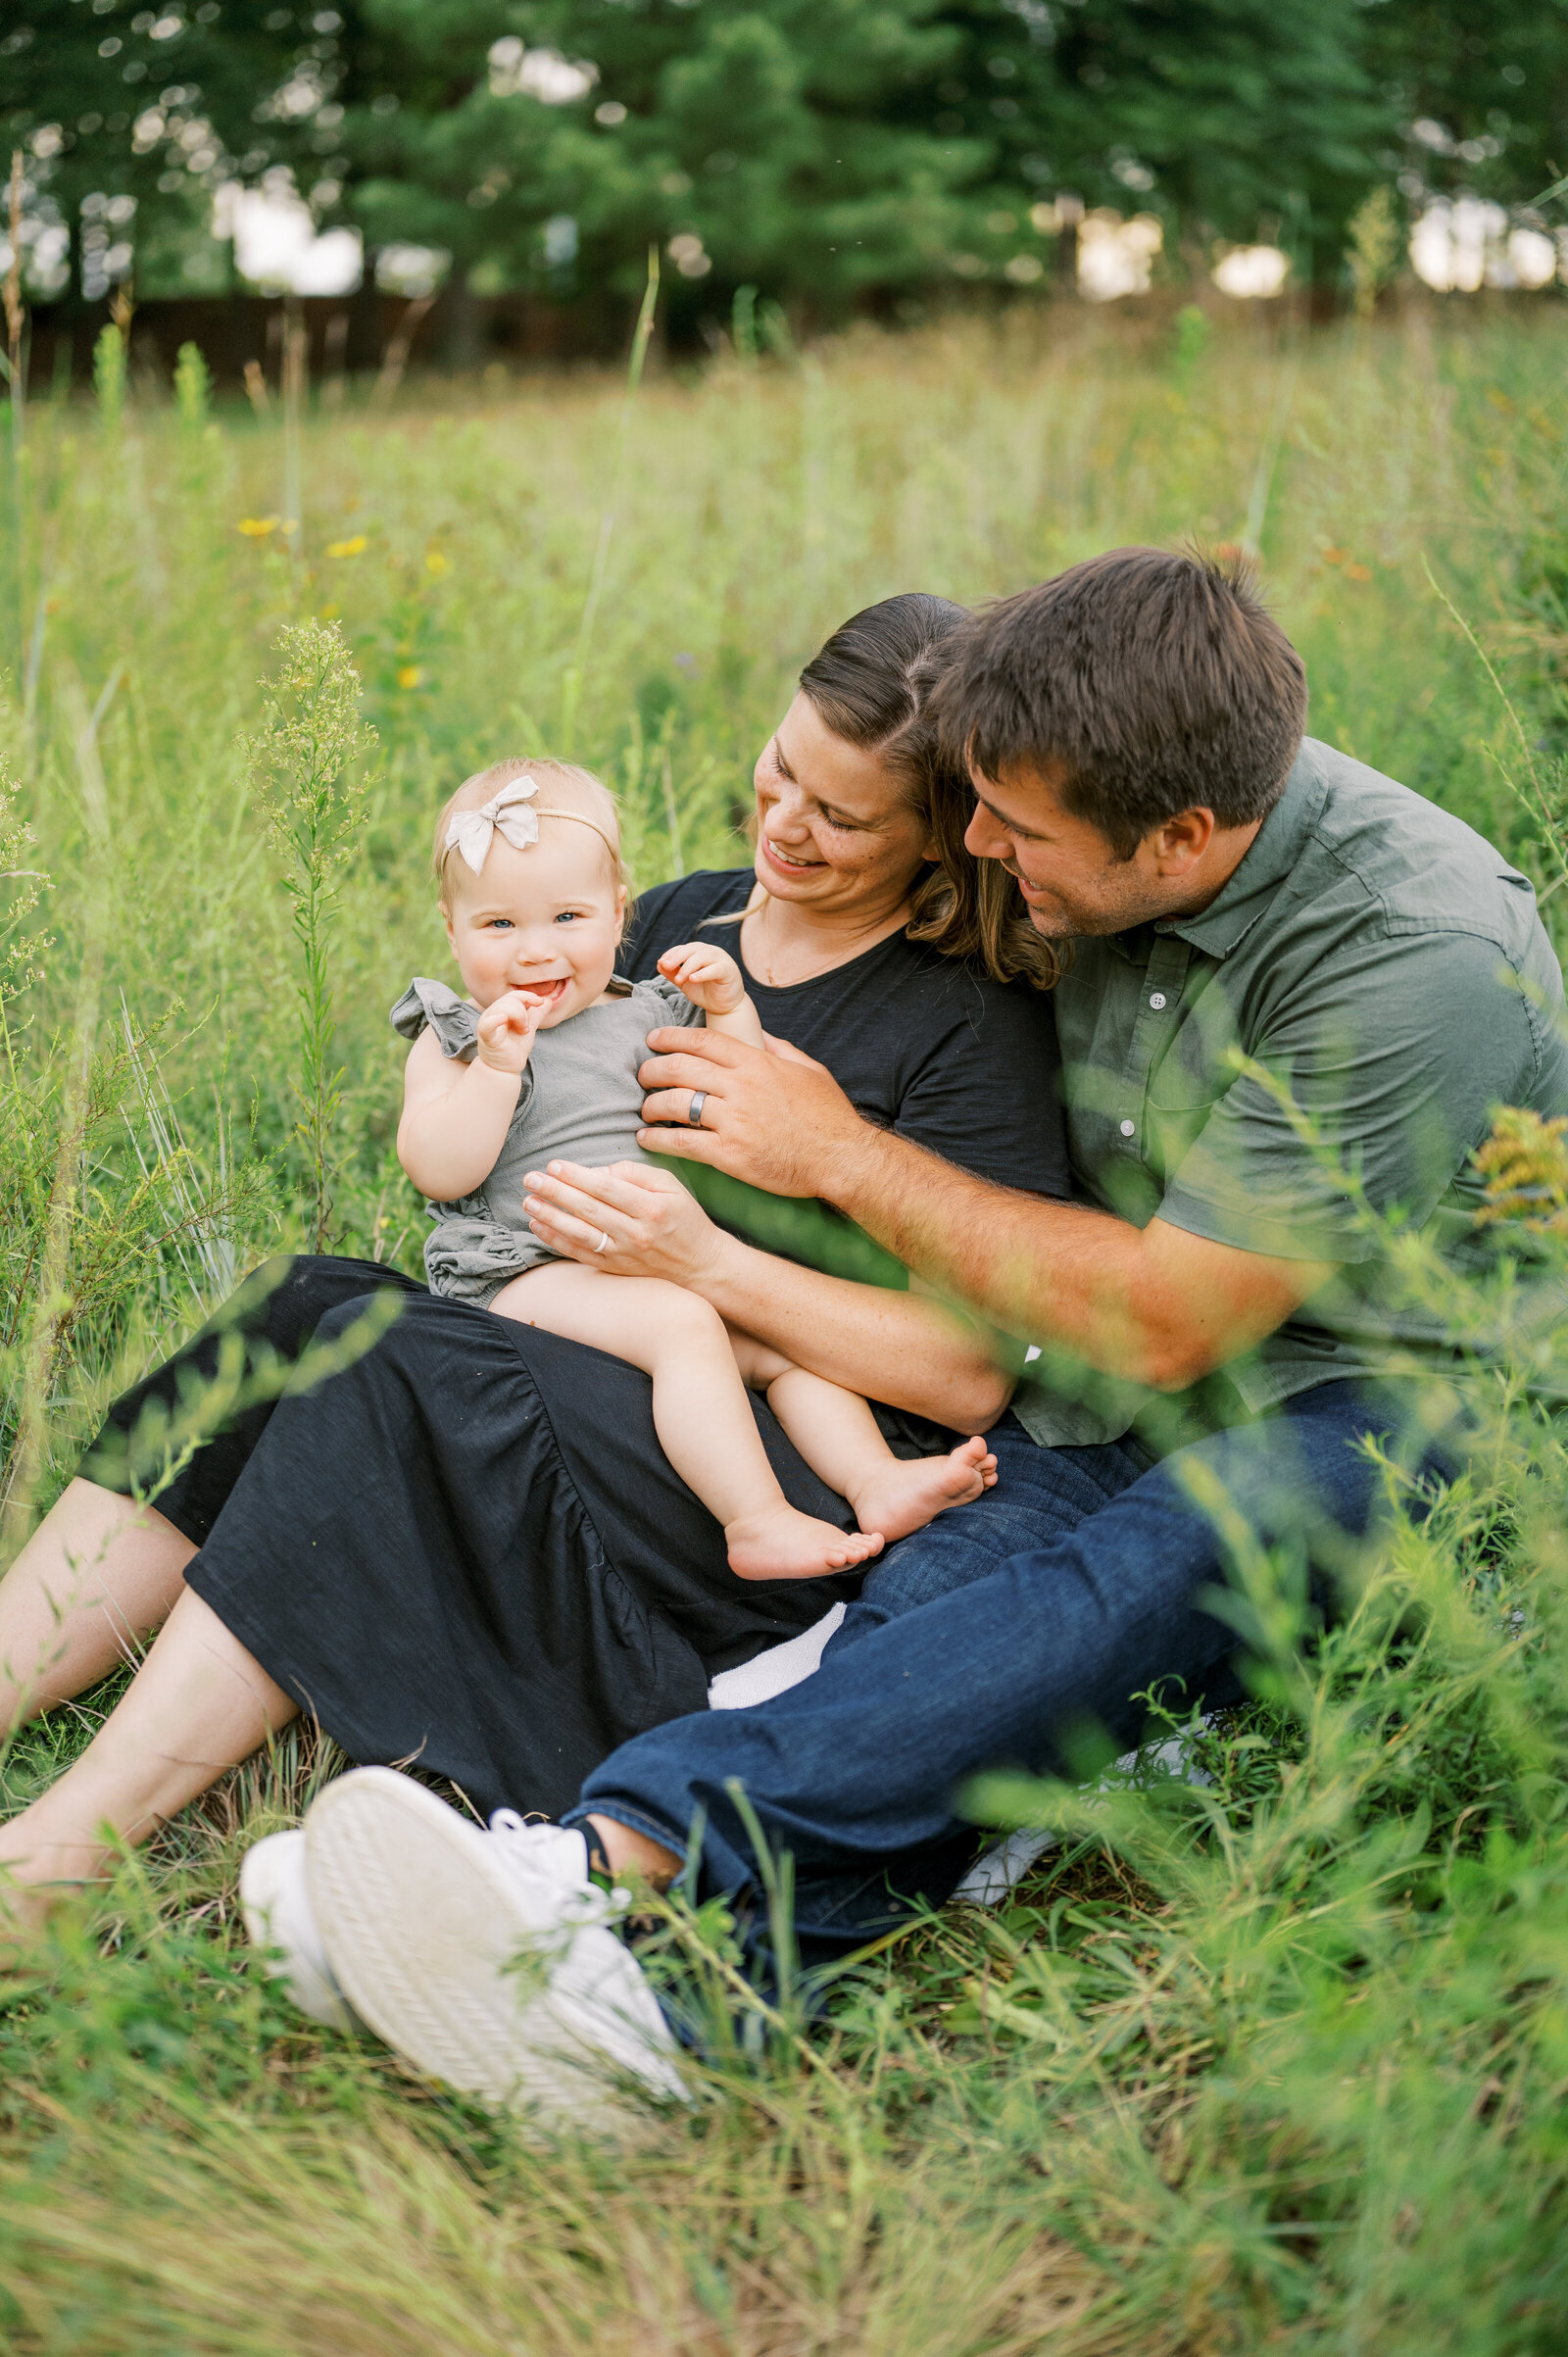 Mom and dad sit together in the grass holding one year old baby girl for family photo